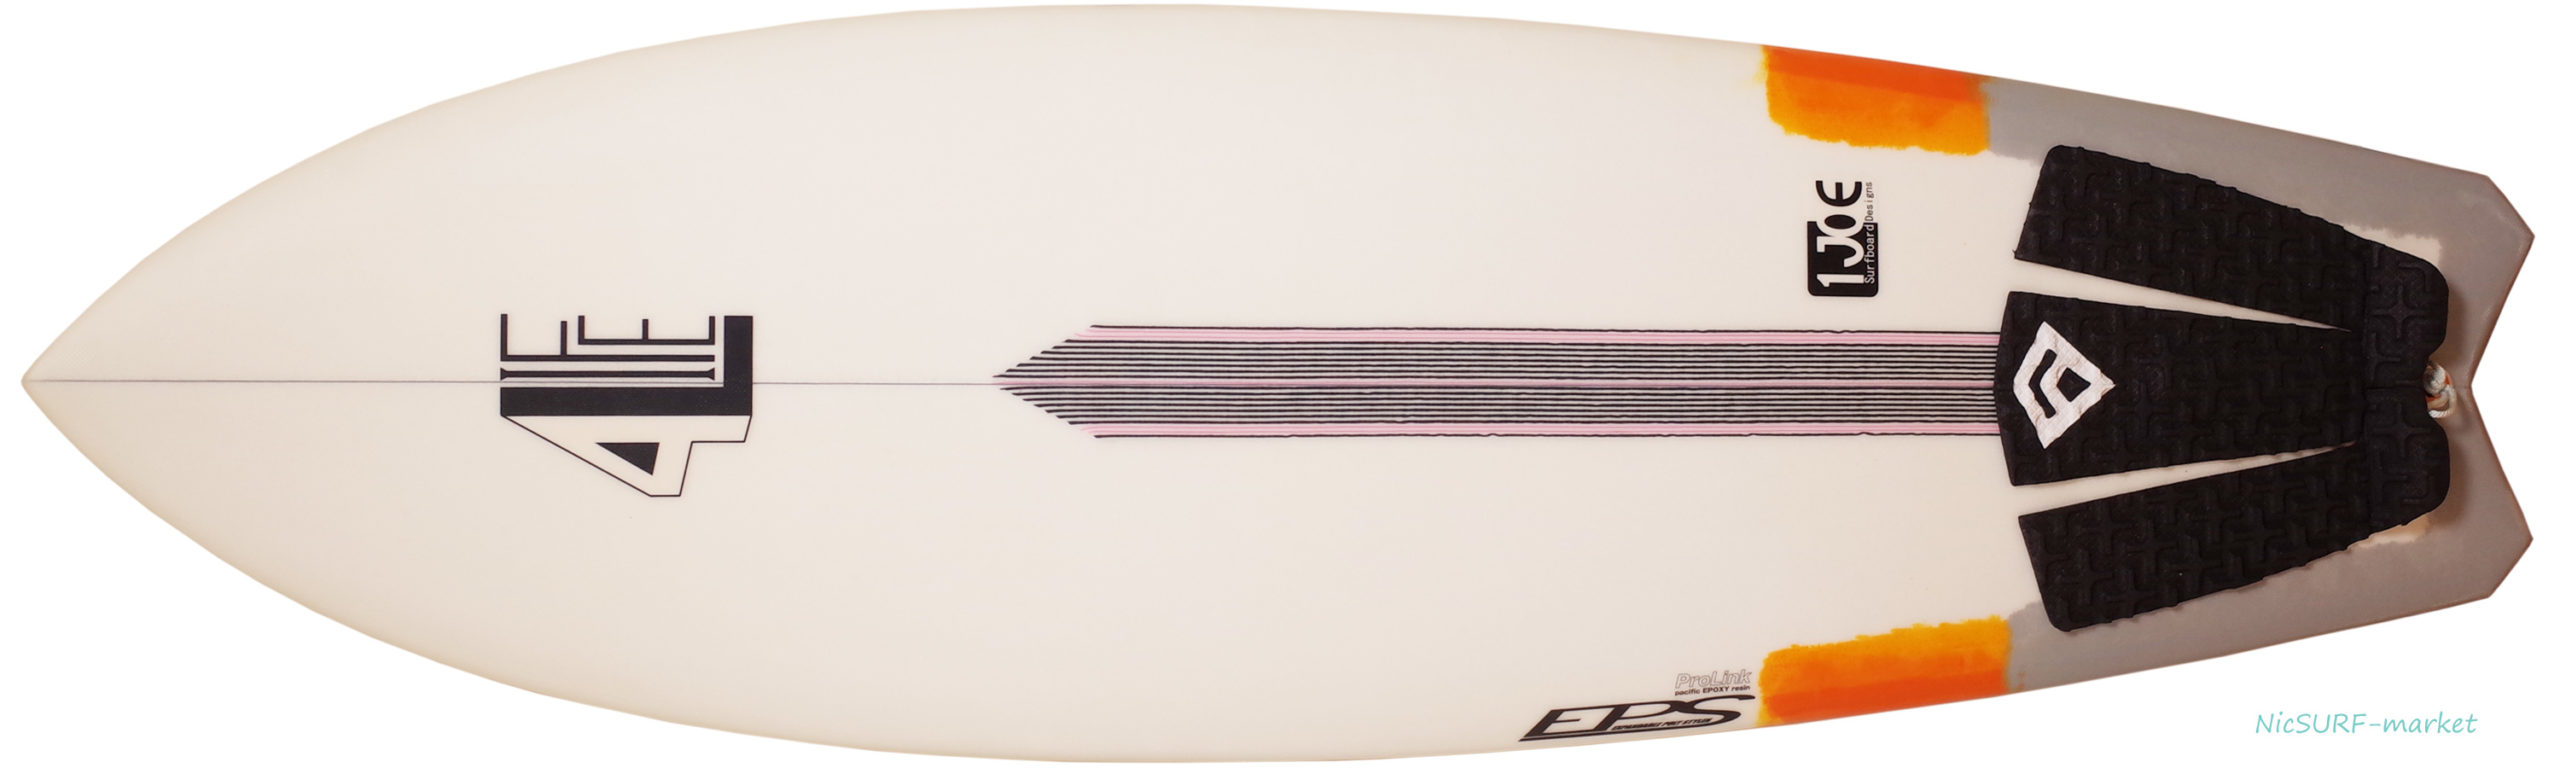 4L / FOR LIFE SURFBOARDS RDSモデル 中古ショートボード 5`6 極上美品 